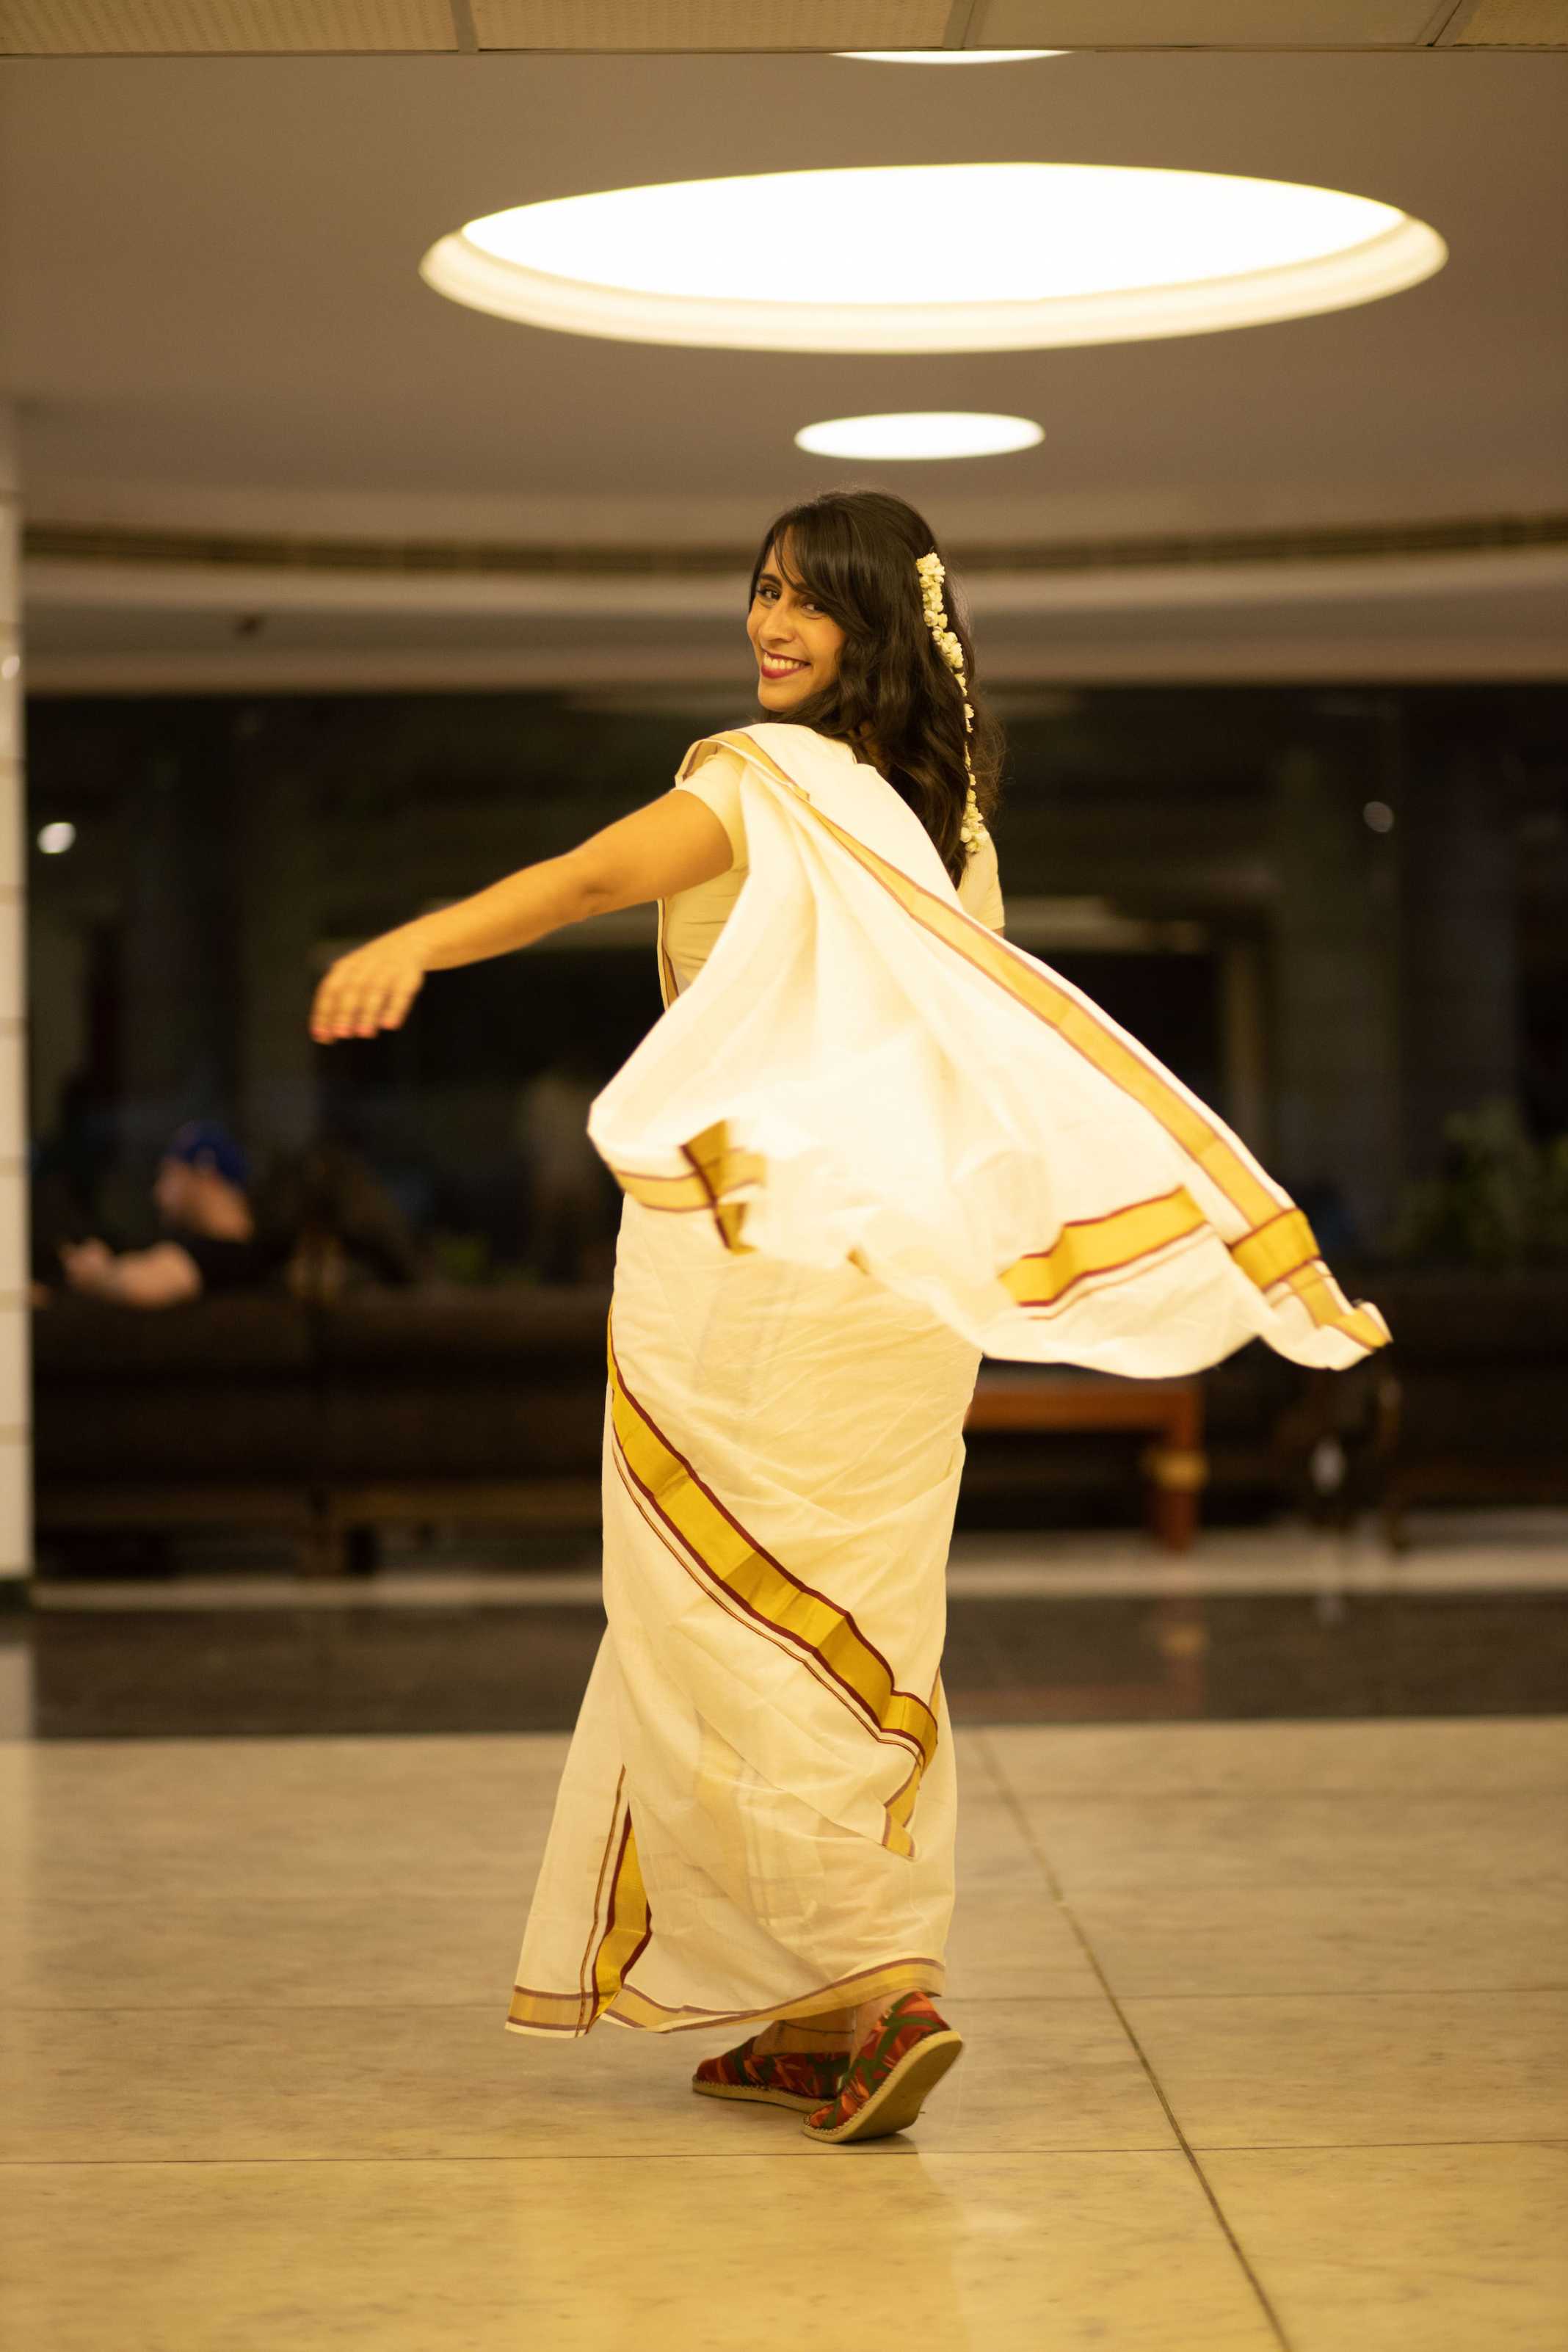 How to wear a saree